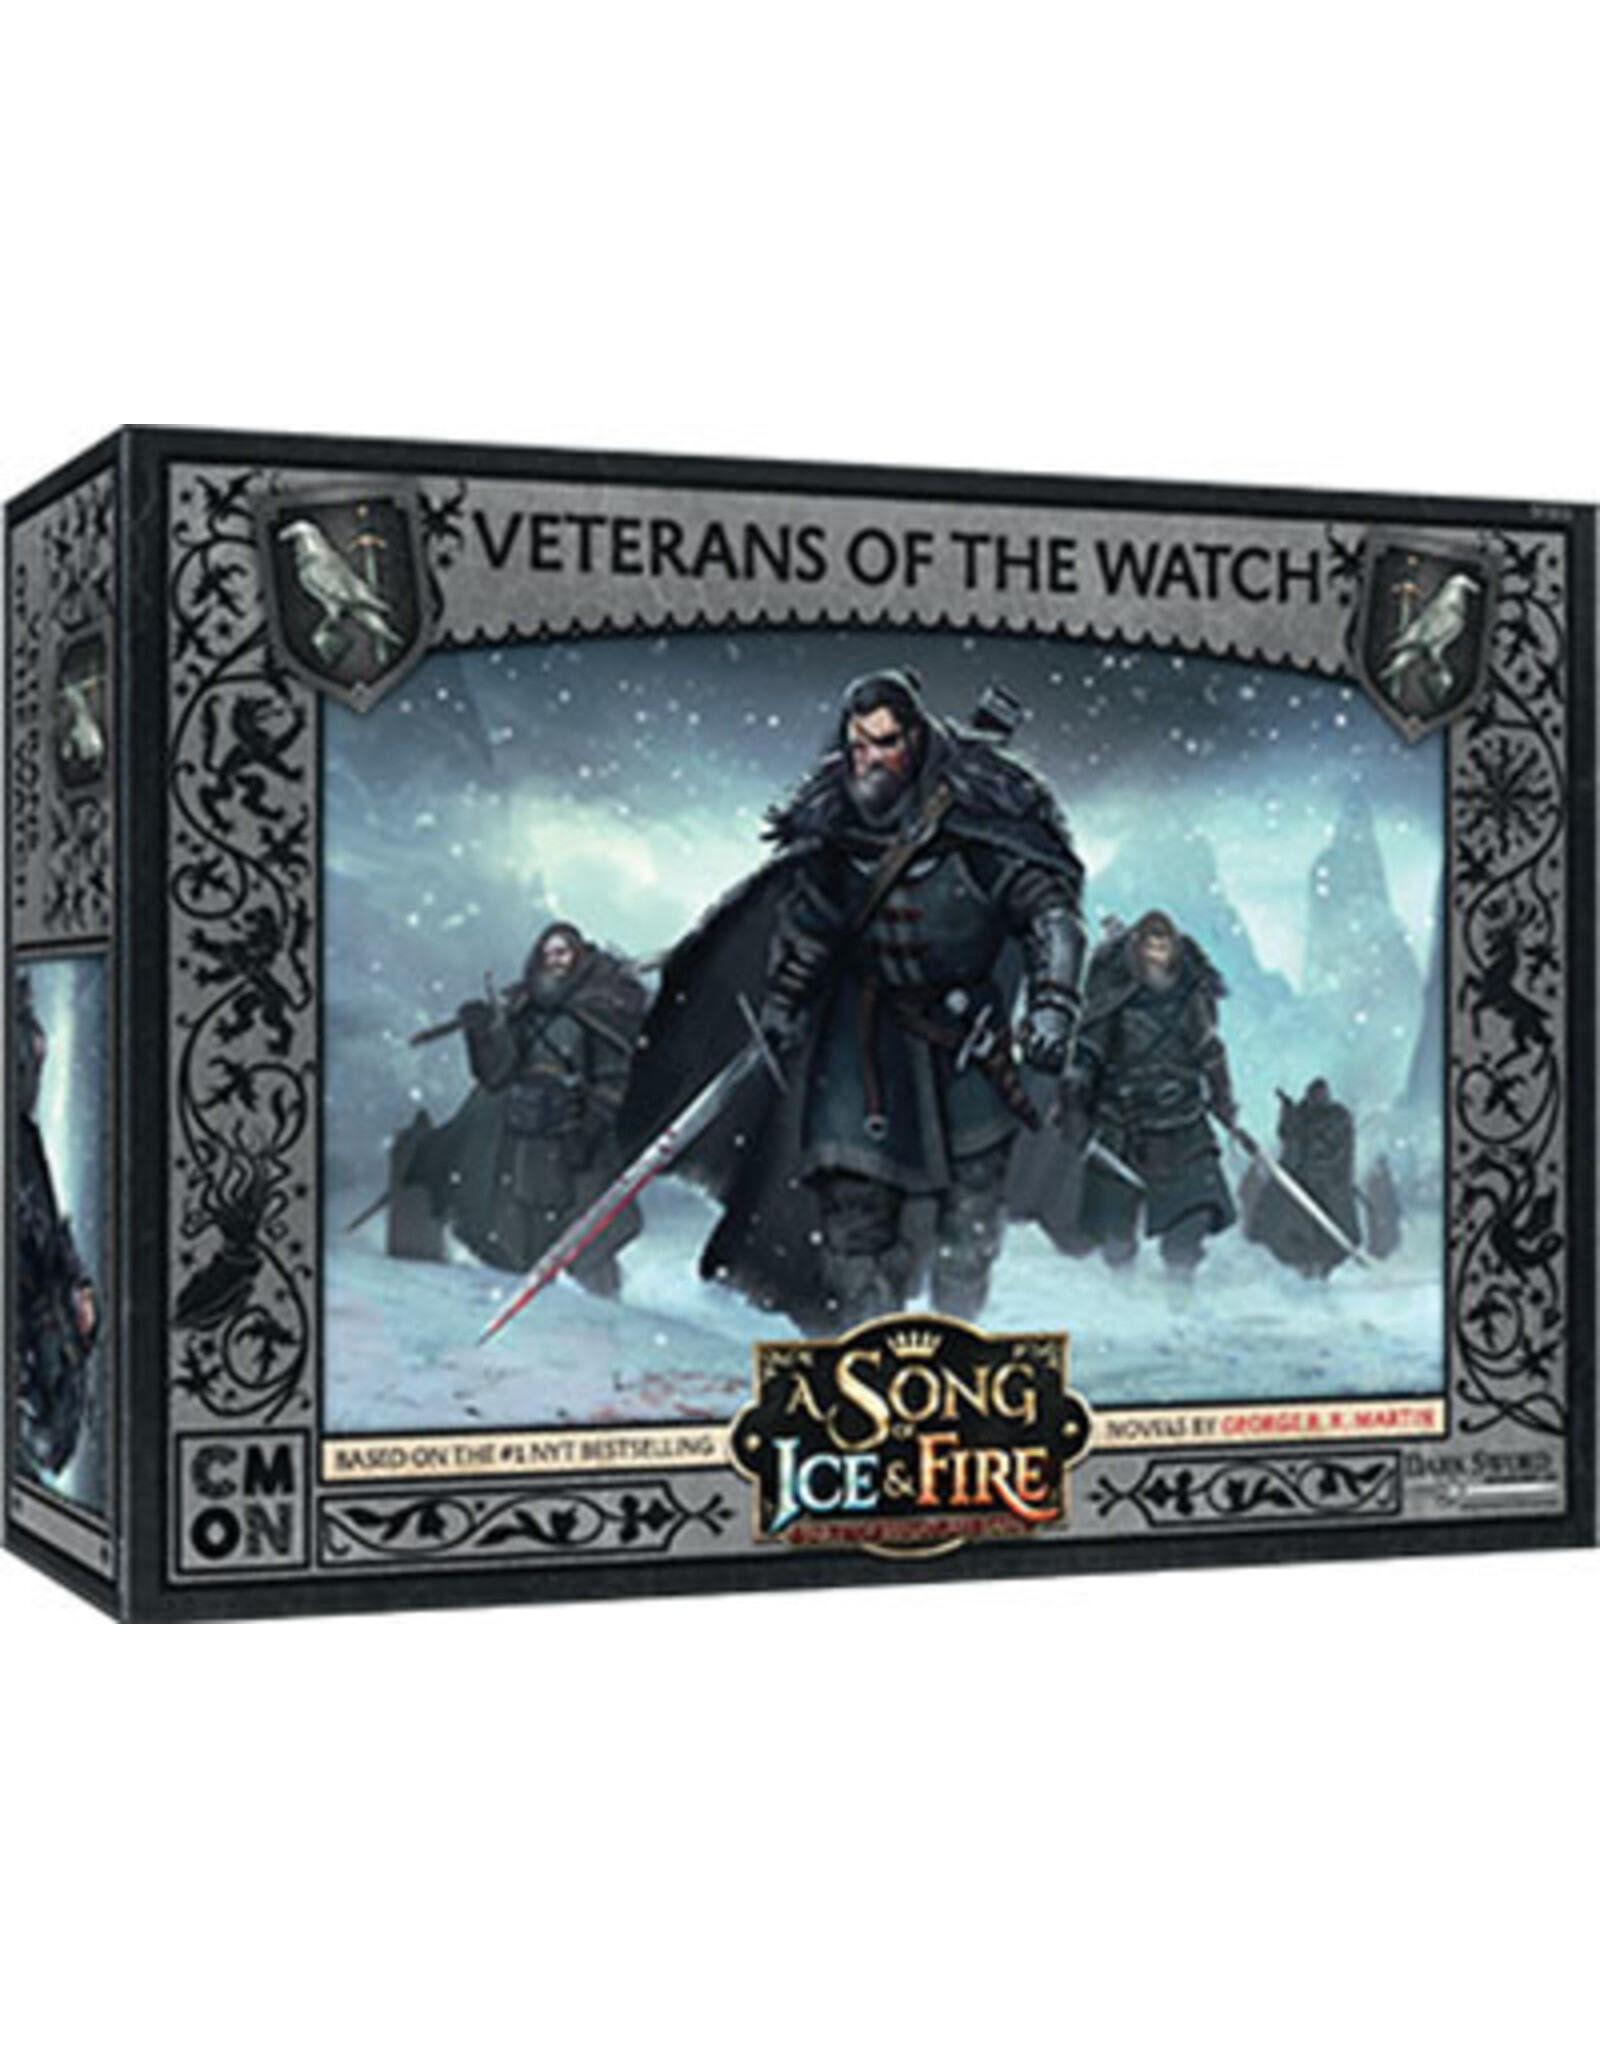 A Song of Ice & Fire: Tabletop Miniatures Game: Night's Watch Veterans of the Watch Unit Box